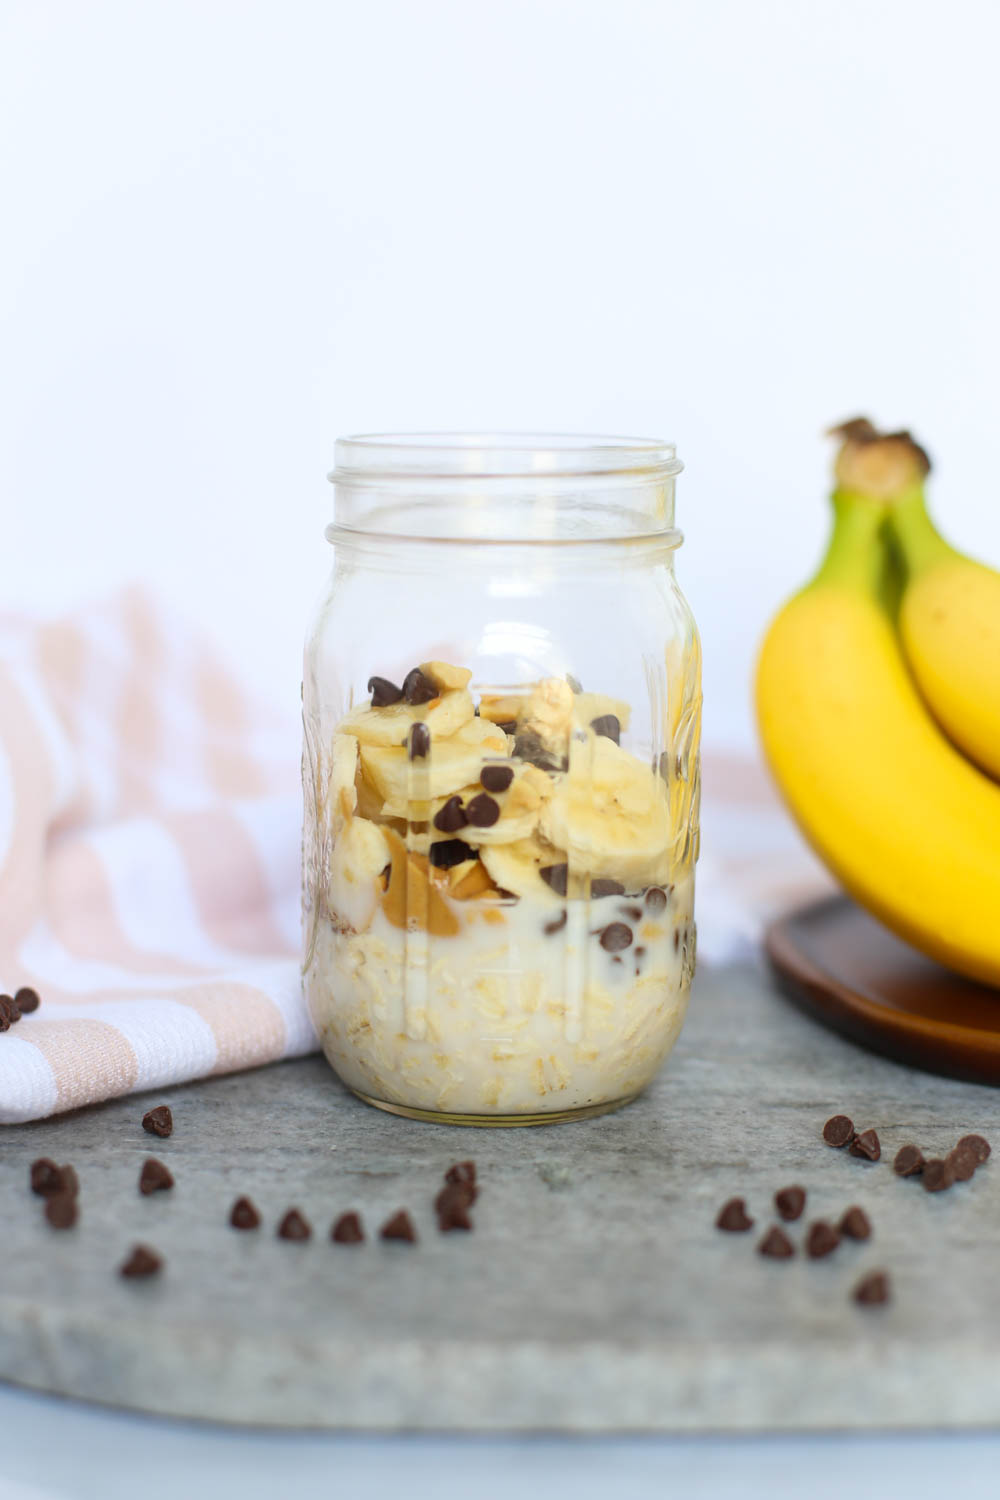 Overnight oats with peanut butter, mini chocolate chips, and sliced bananas in a mason jar.